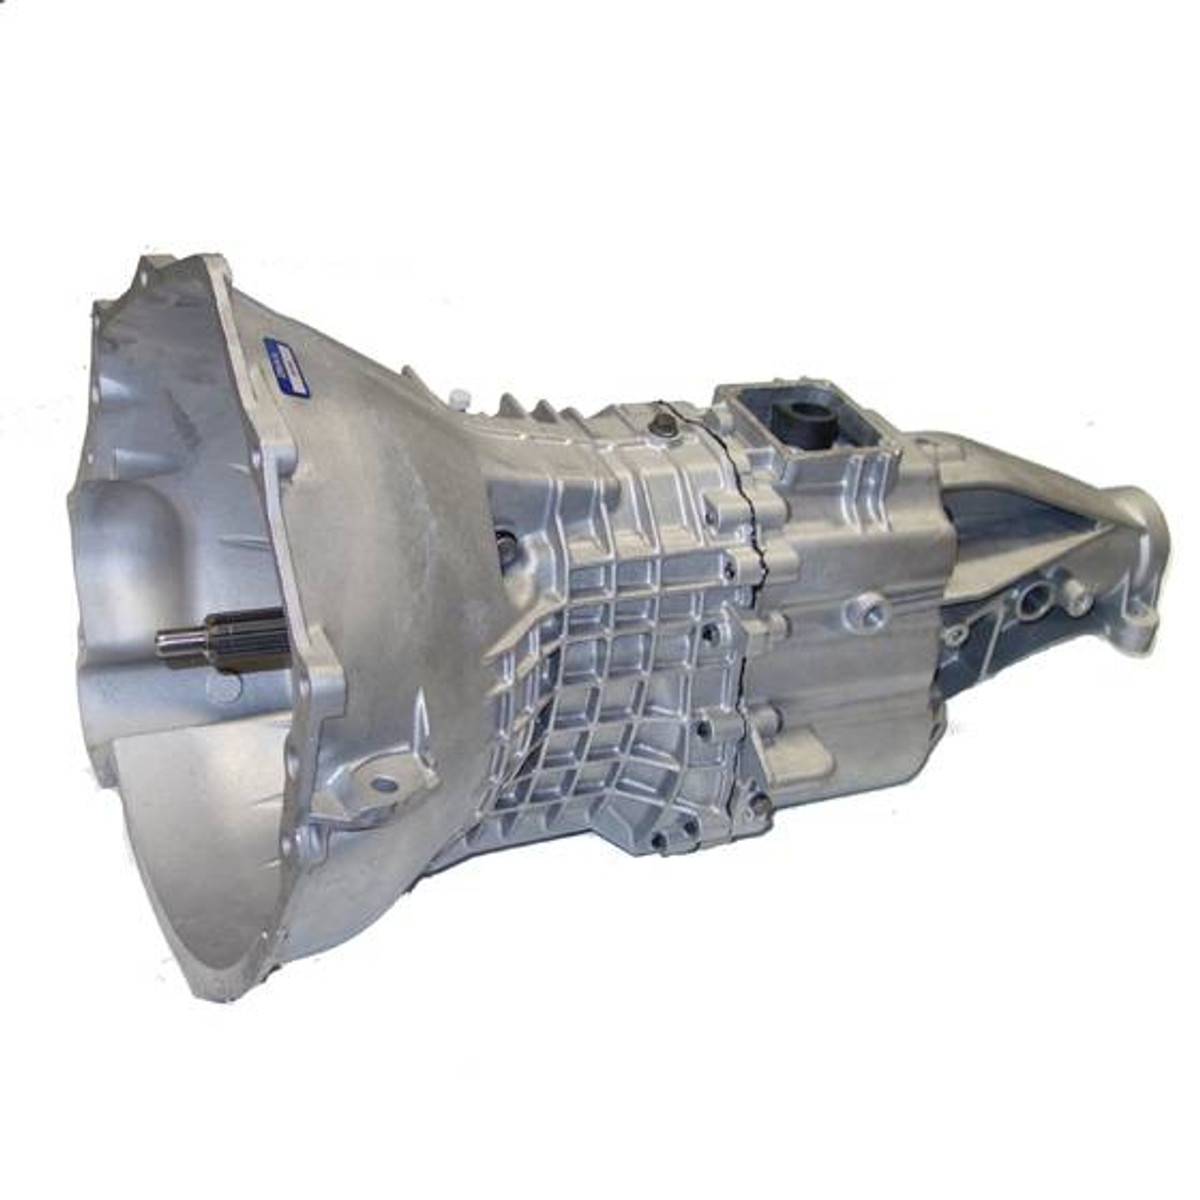 HM290 Manual Transmission for GM 1998-2003 S10 And S15 4.3L RWD 5 Speed RMT290C-12